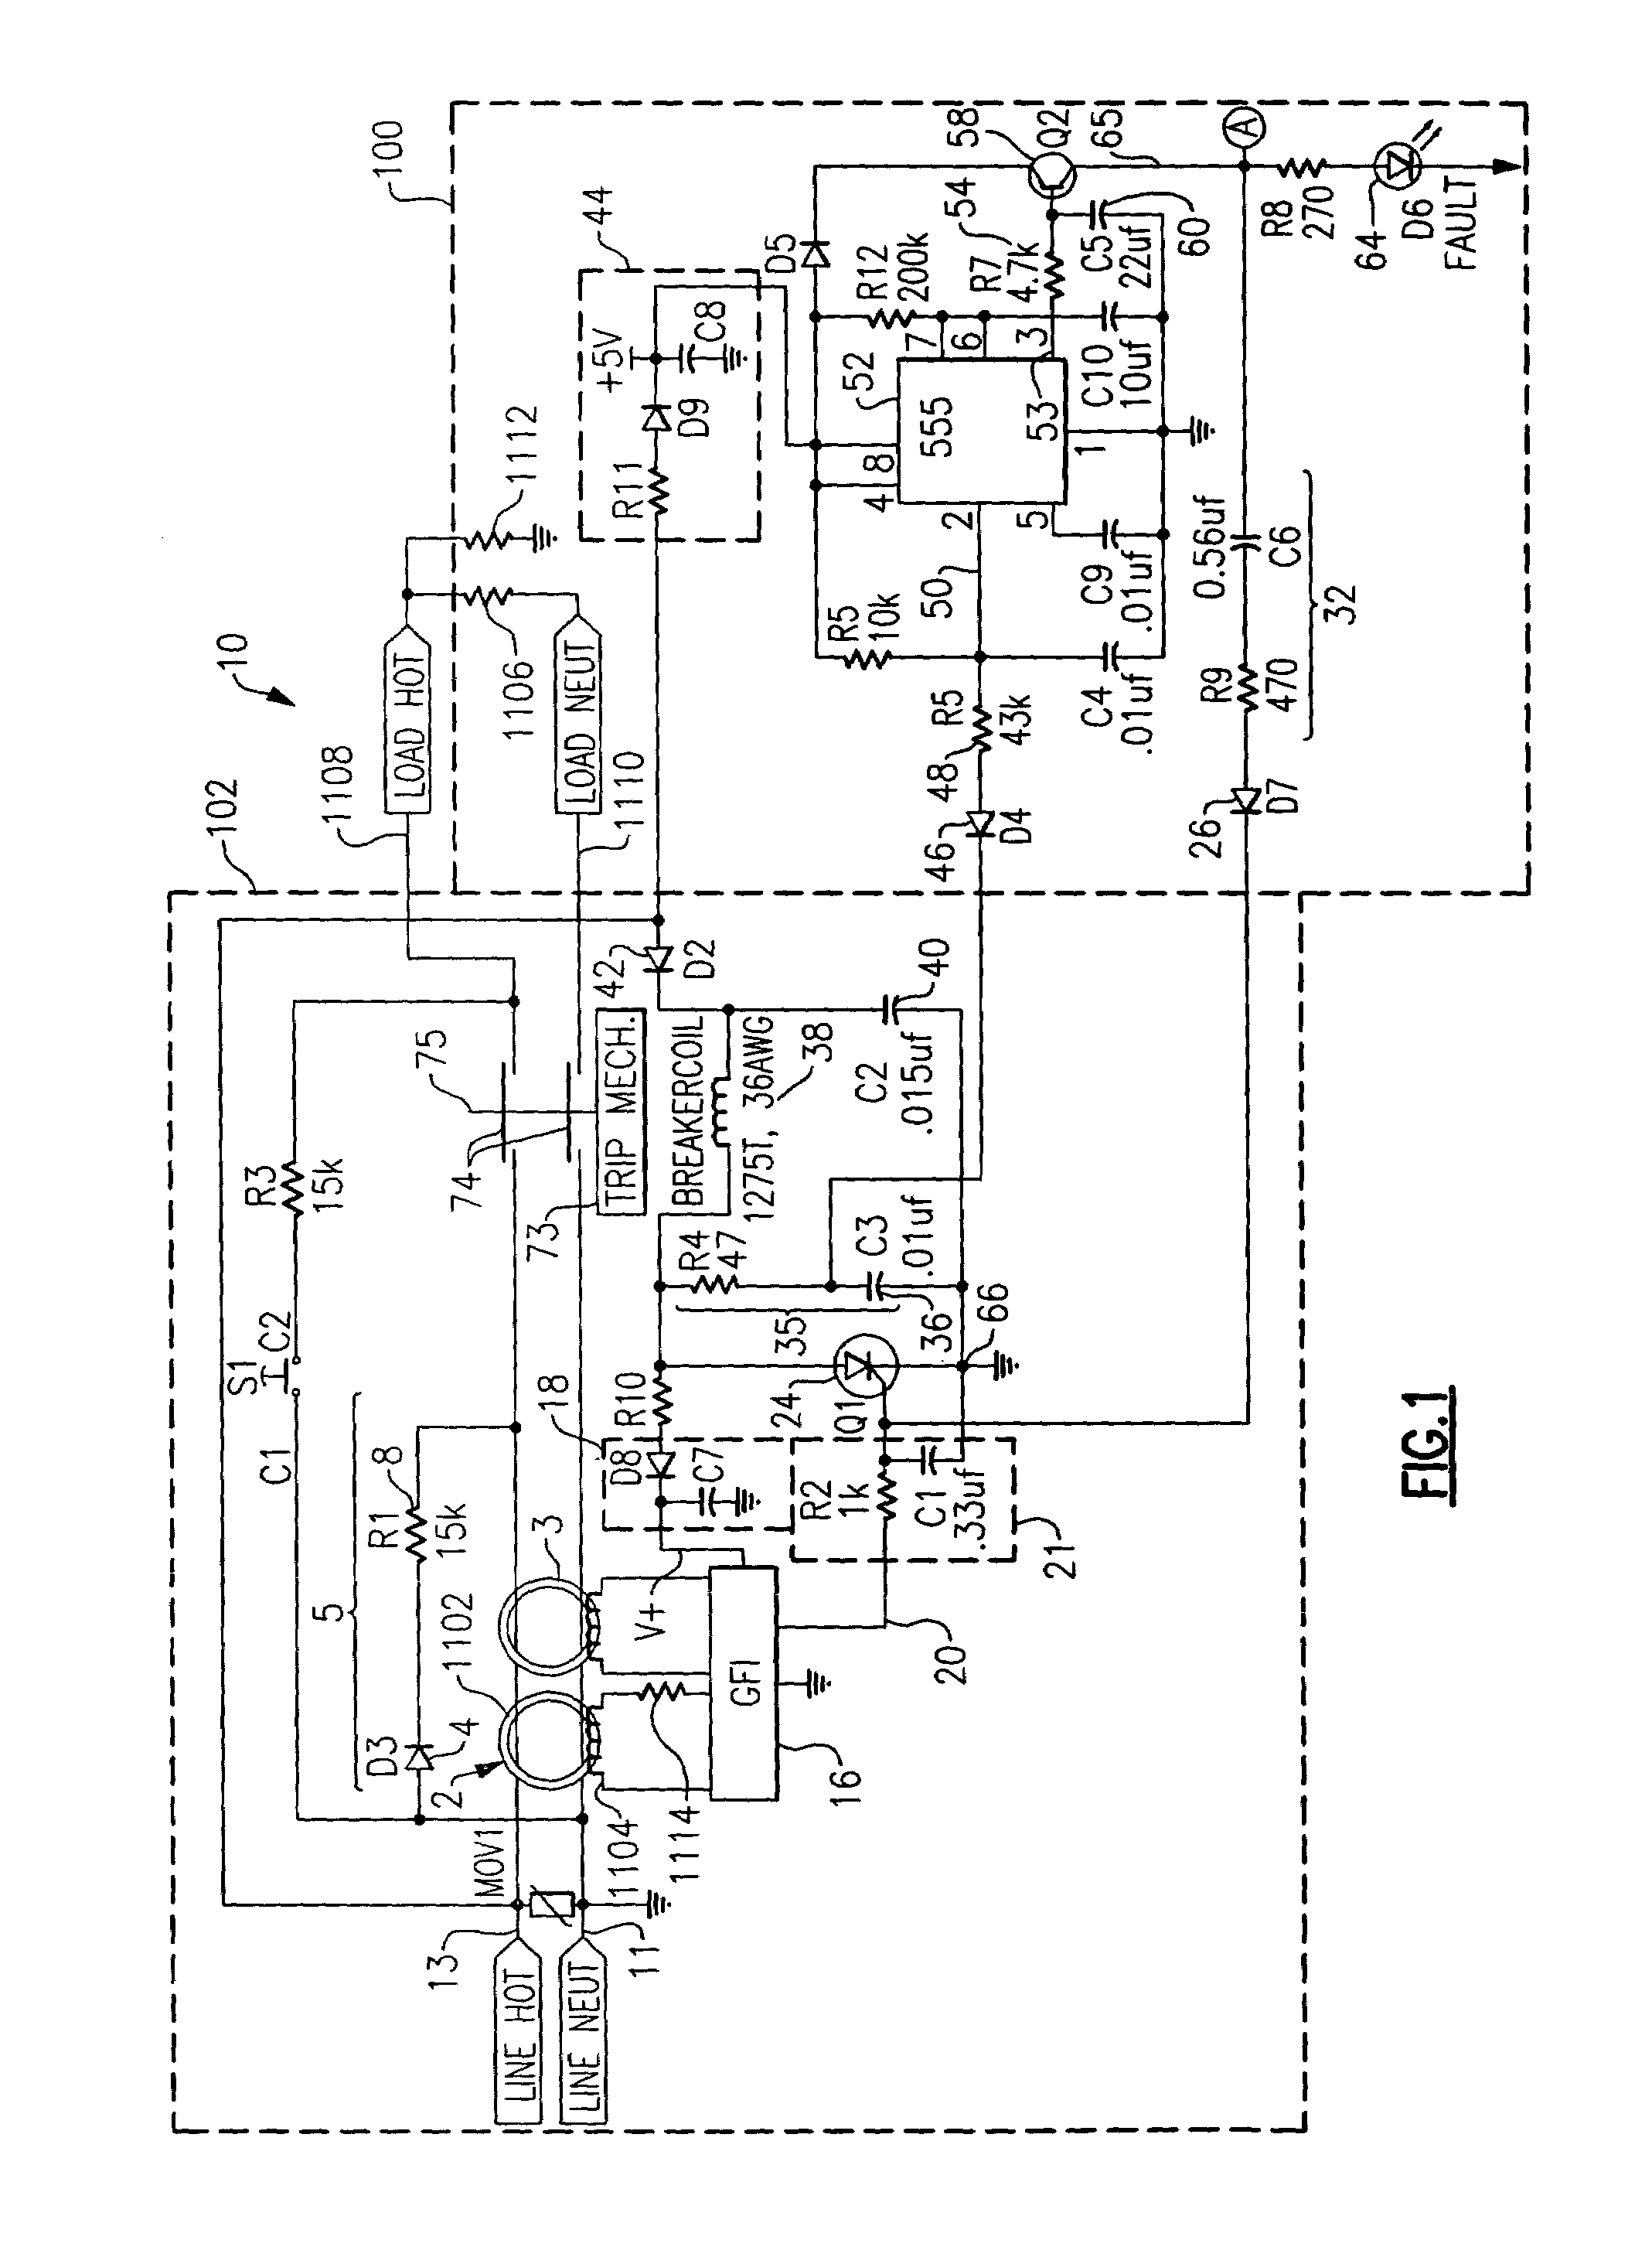 Circuit protection device with timed negative half-cycle self test